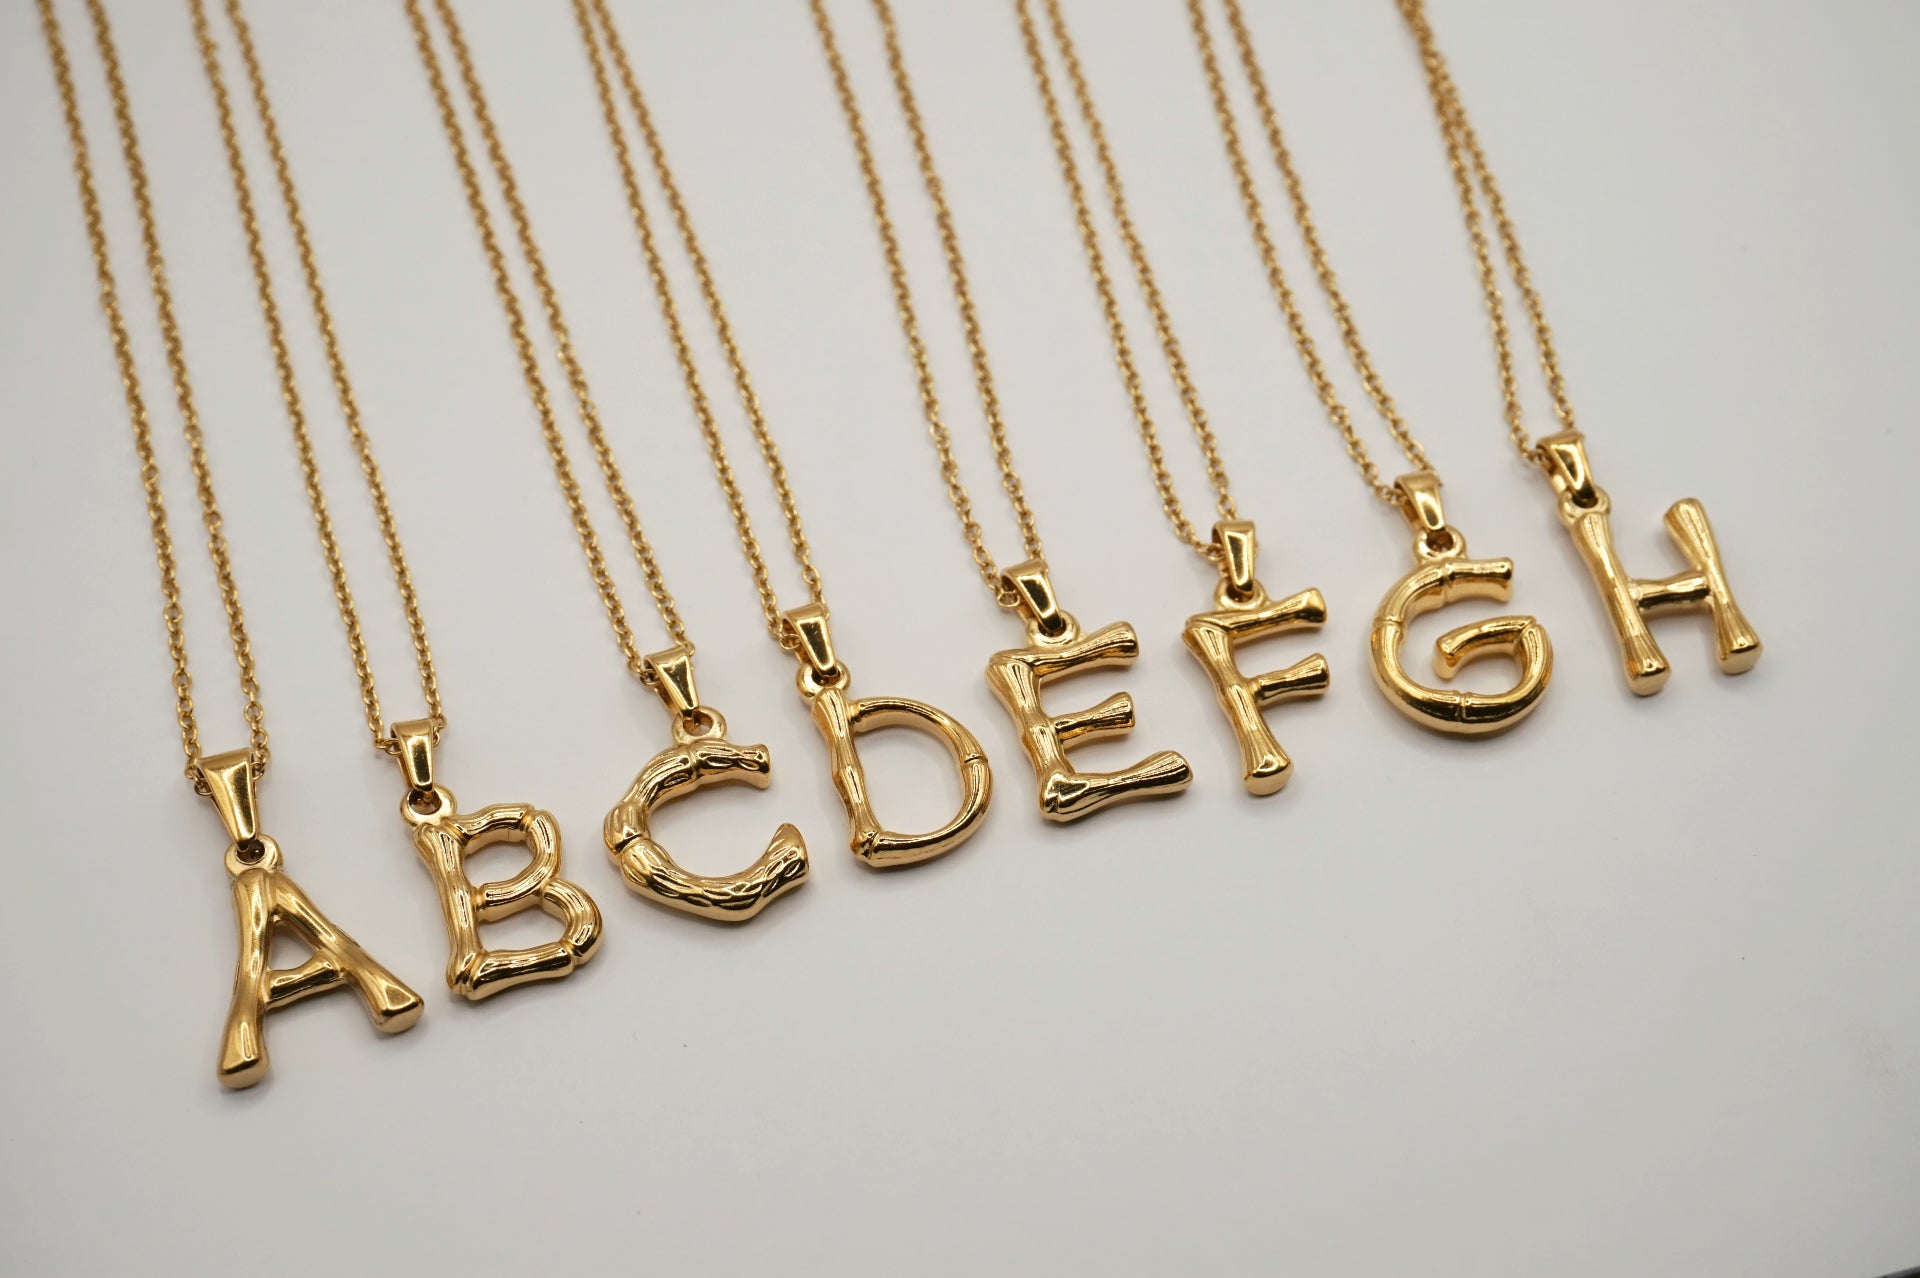 Initial necklace. Initial Letter Necklace for women. Best Gift for Women. Kendra scott initial necklace. Gold necklace for women